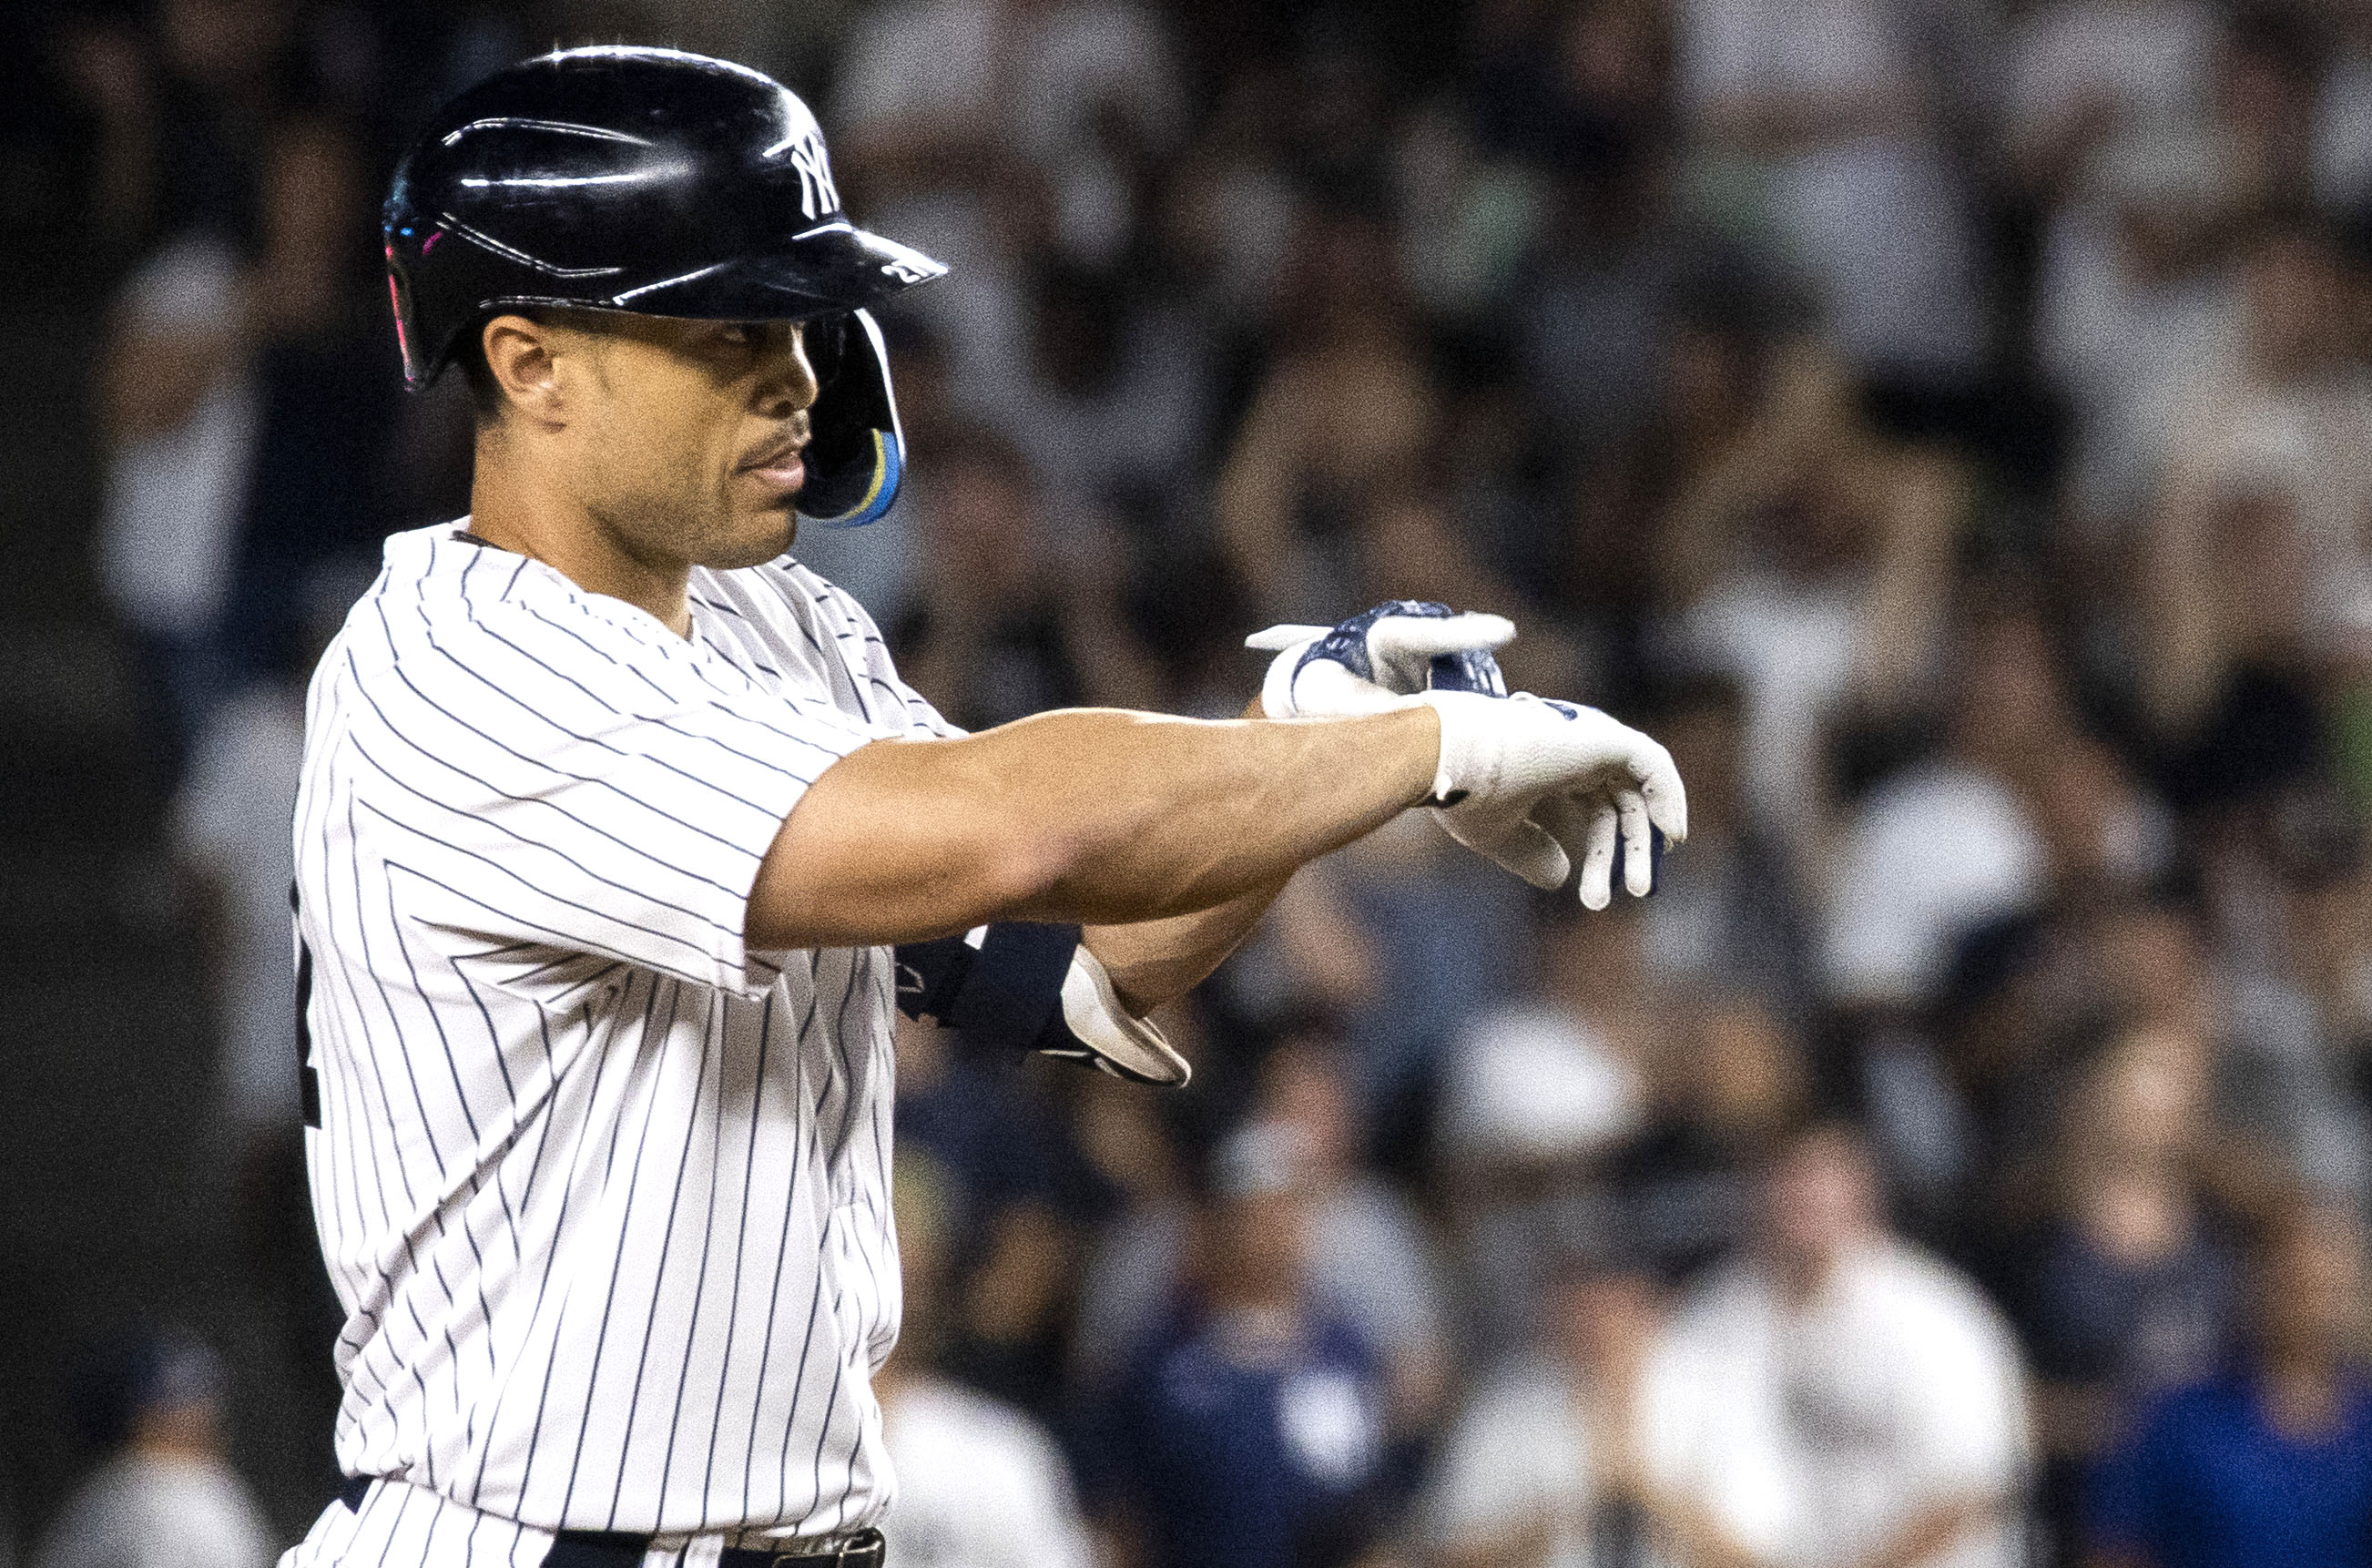 Giancarlo Stanton reacts after belting a double in the Yankees' 14-1 blowout win over the Red Sox.